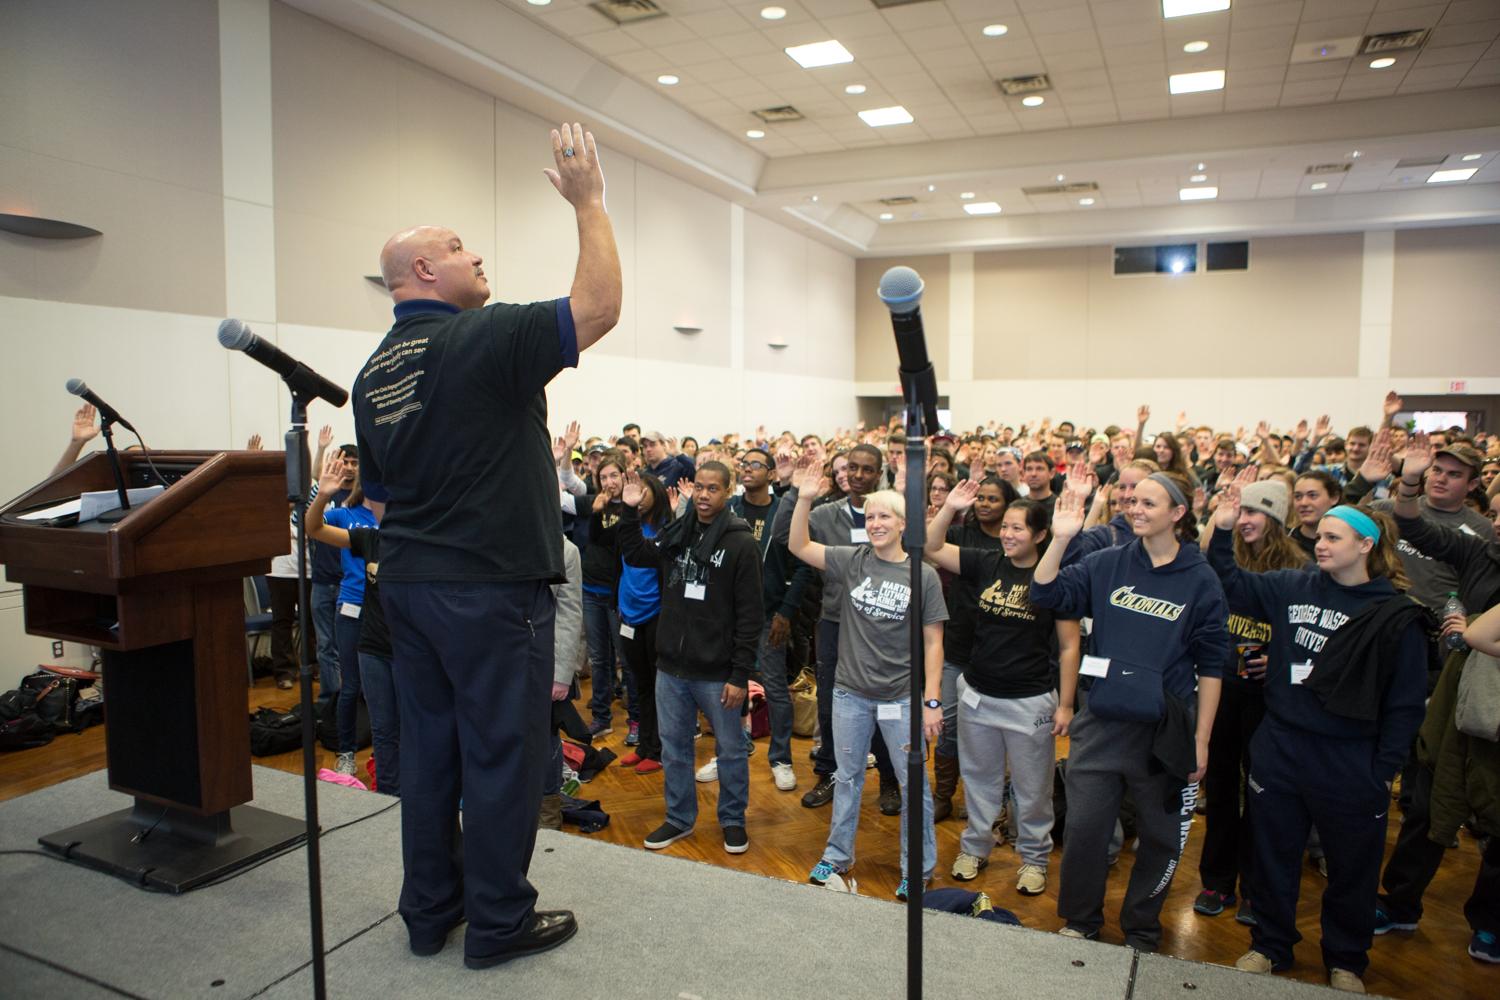 More than 600 George Washington University students participated in Monday's MLK Day of Service.